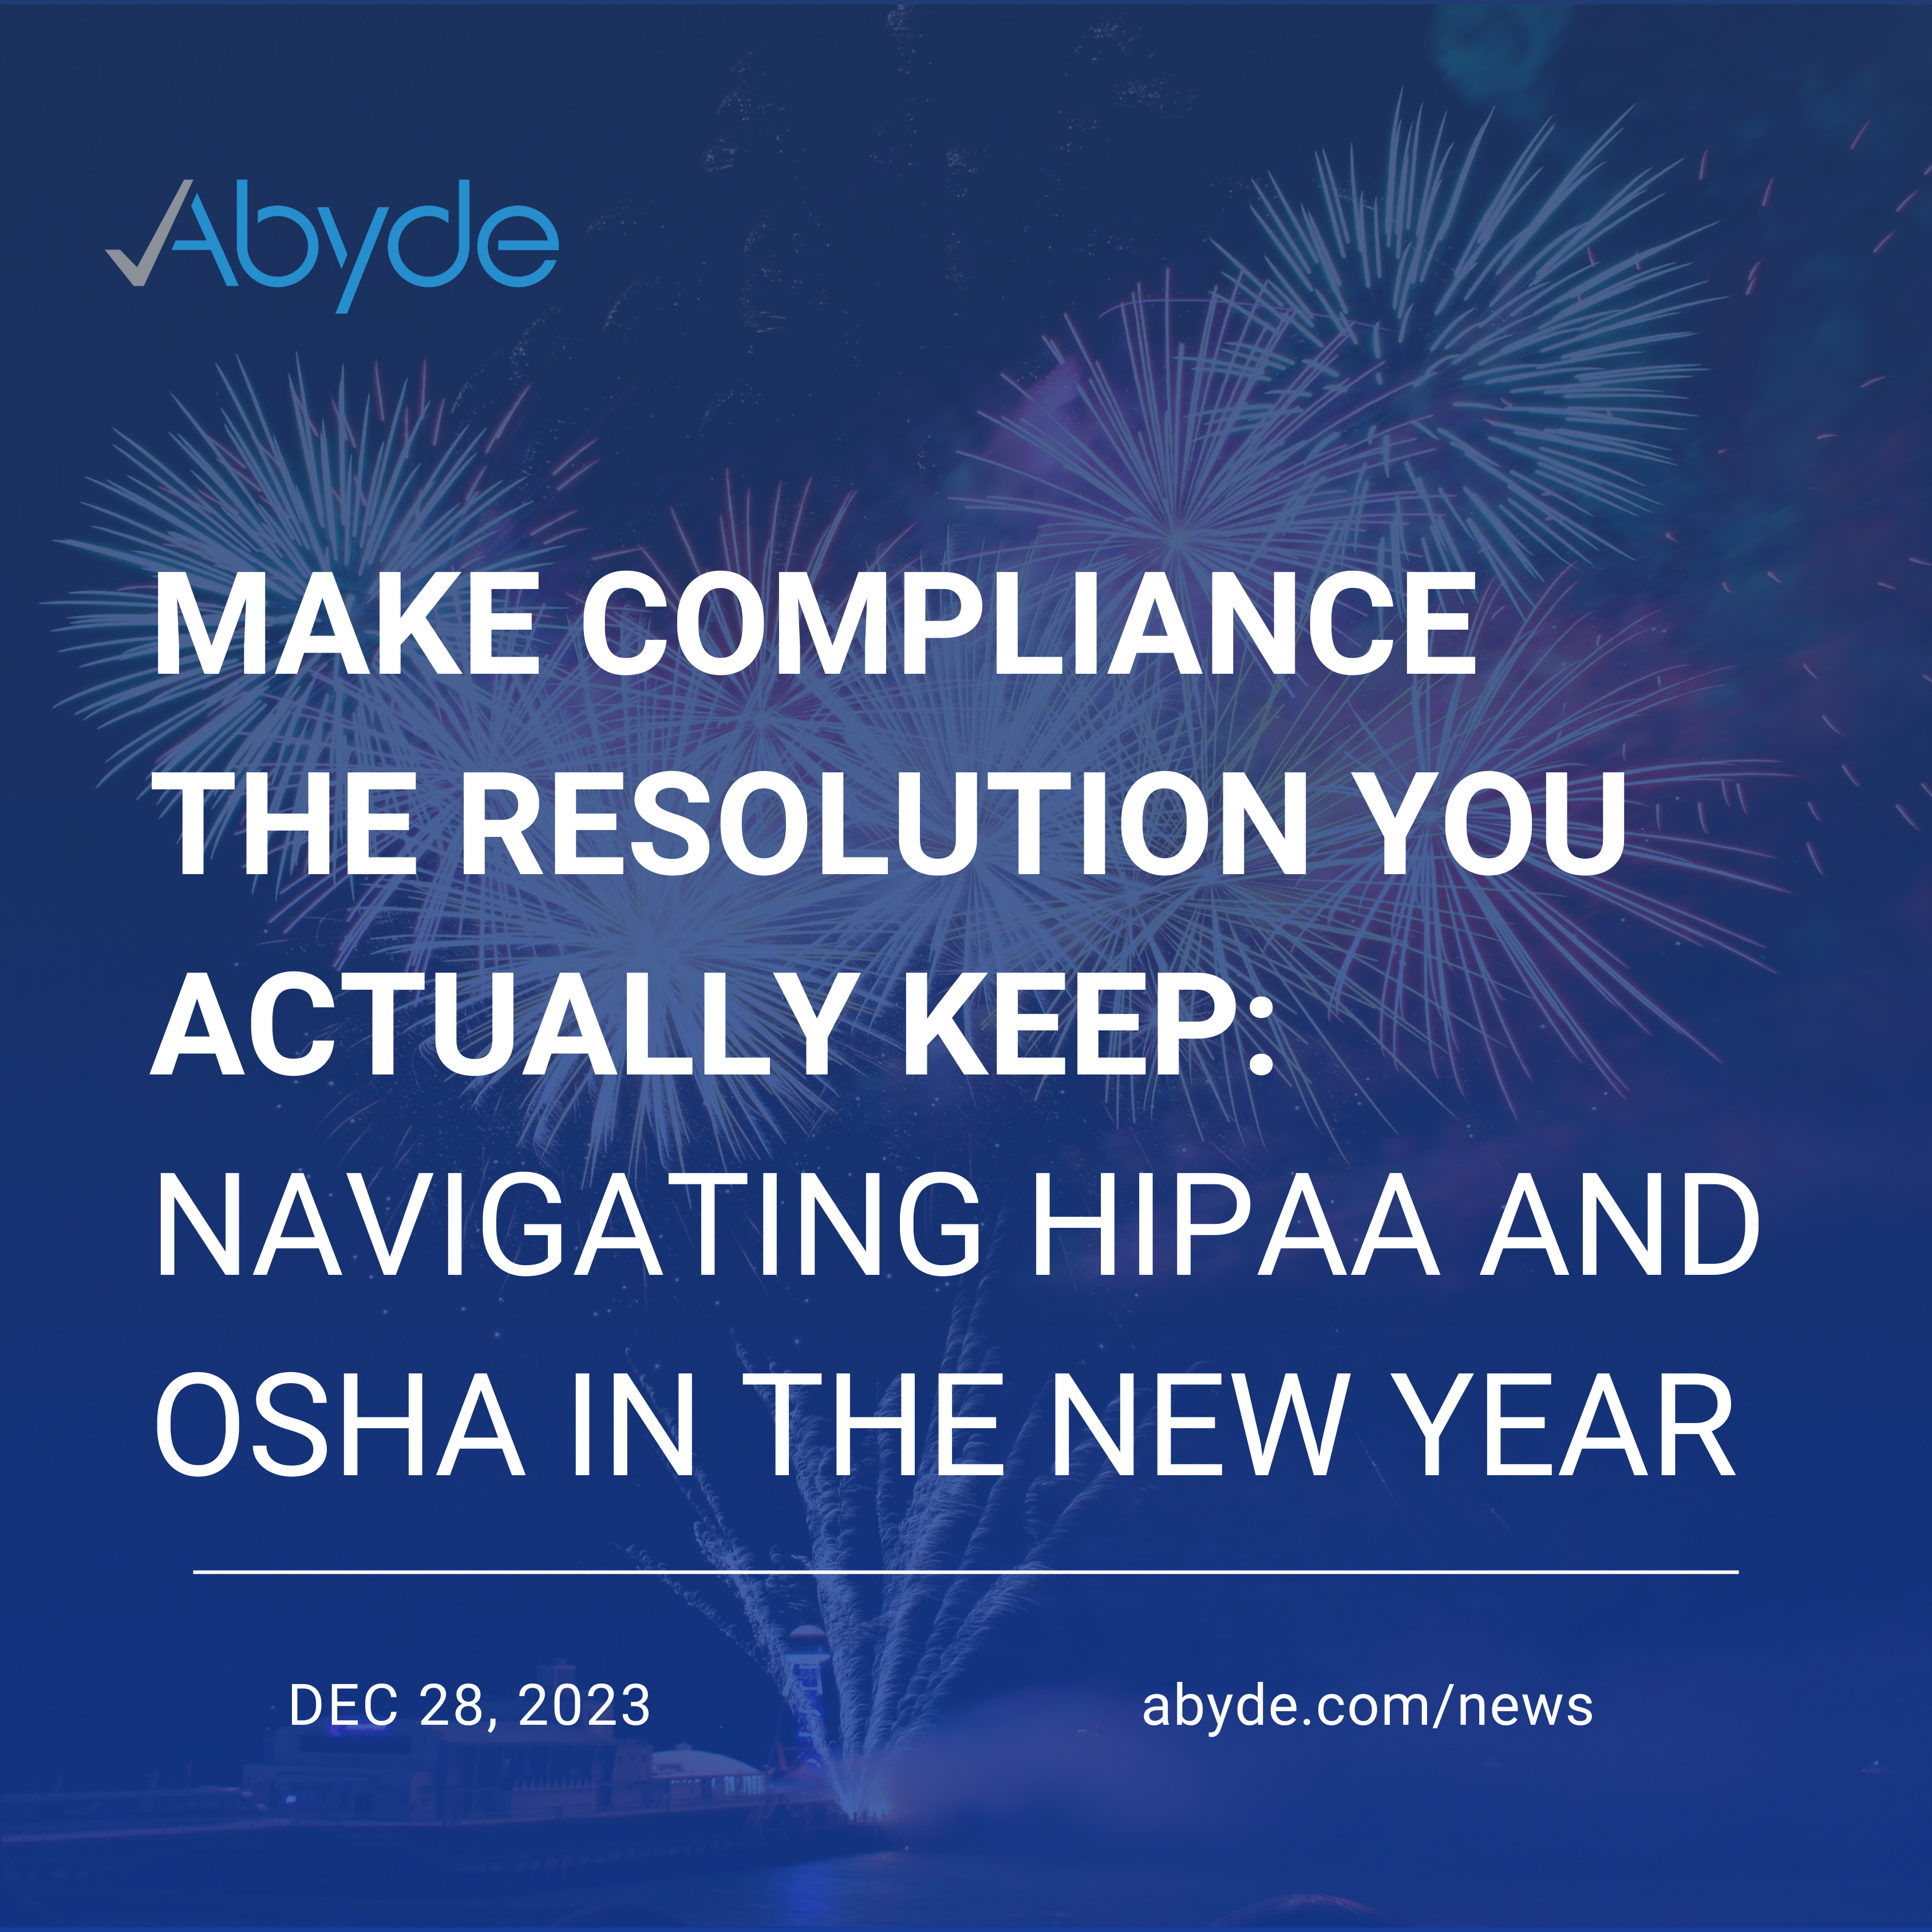 Make Compliance the Resolution You Actually Keep: Navigating HIPAA and OSHA in the New Year